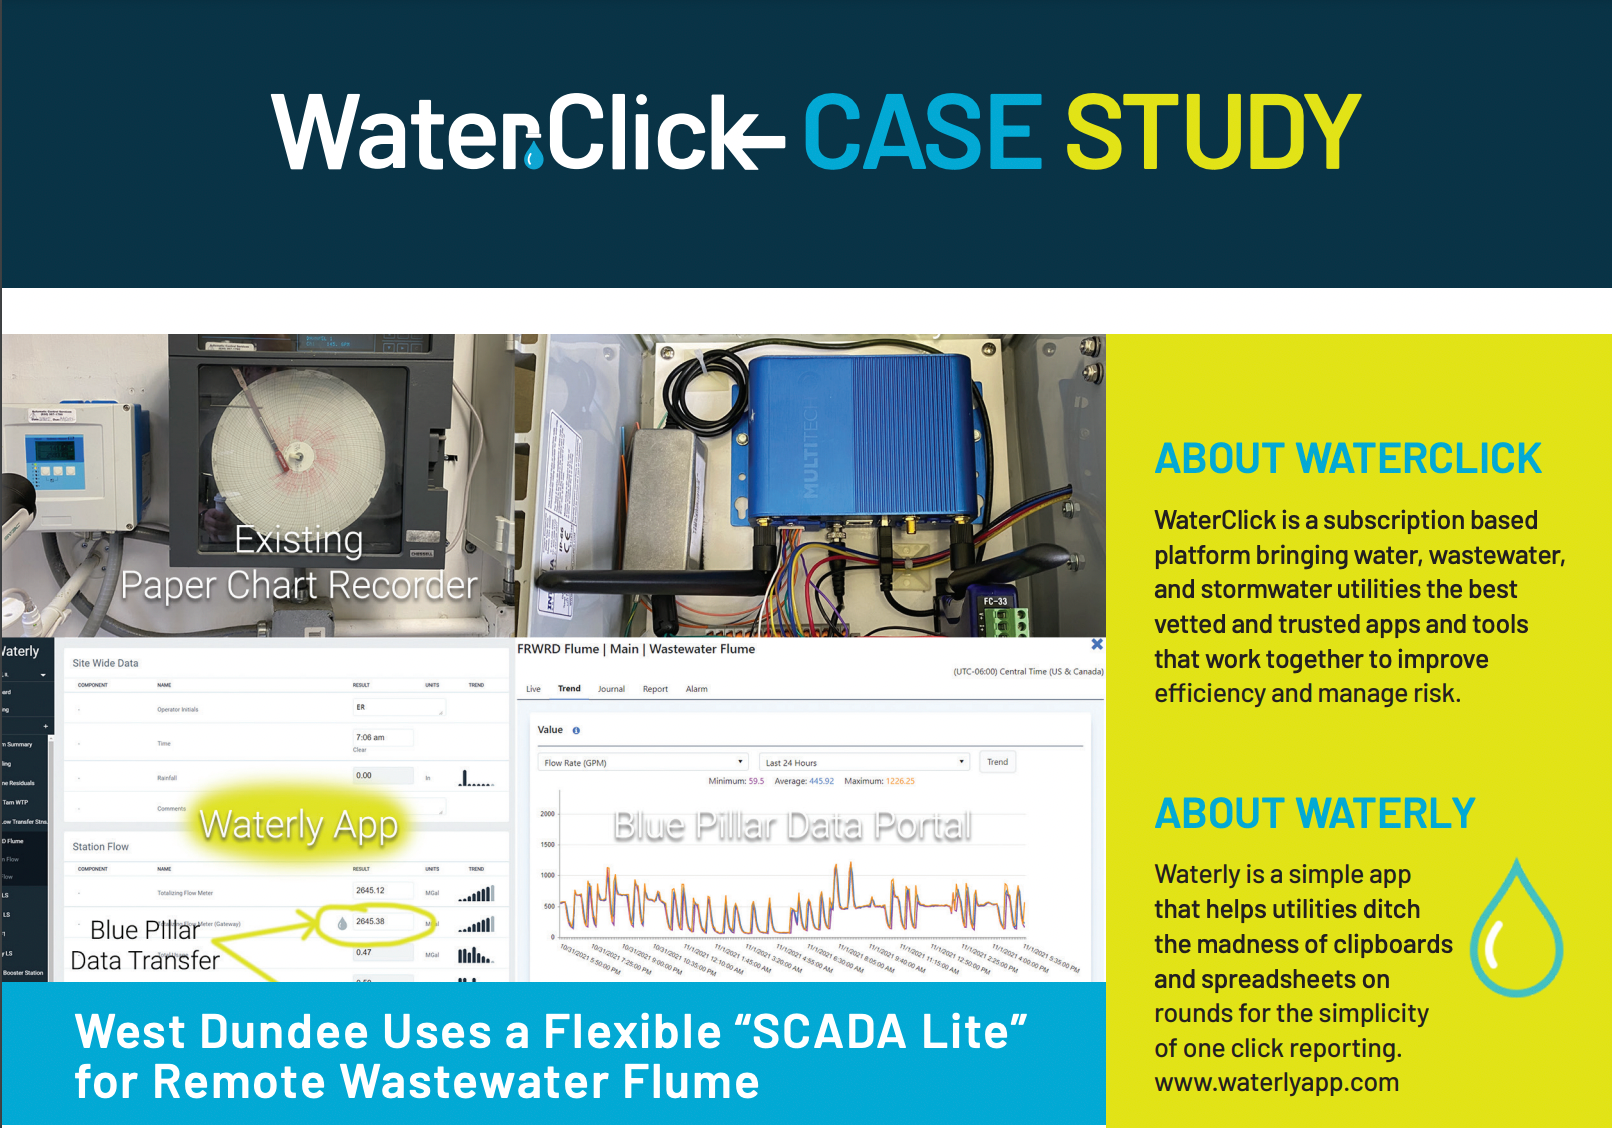 West Dundee Uses a Flexible “SCADA Lite” for Remote Wastewater Flume